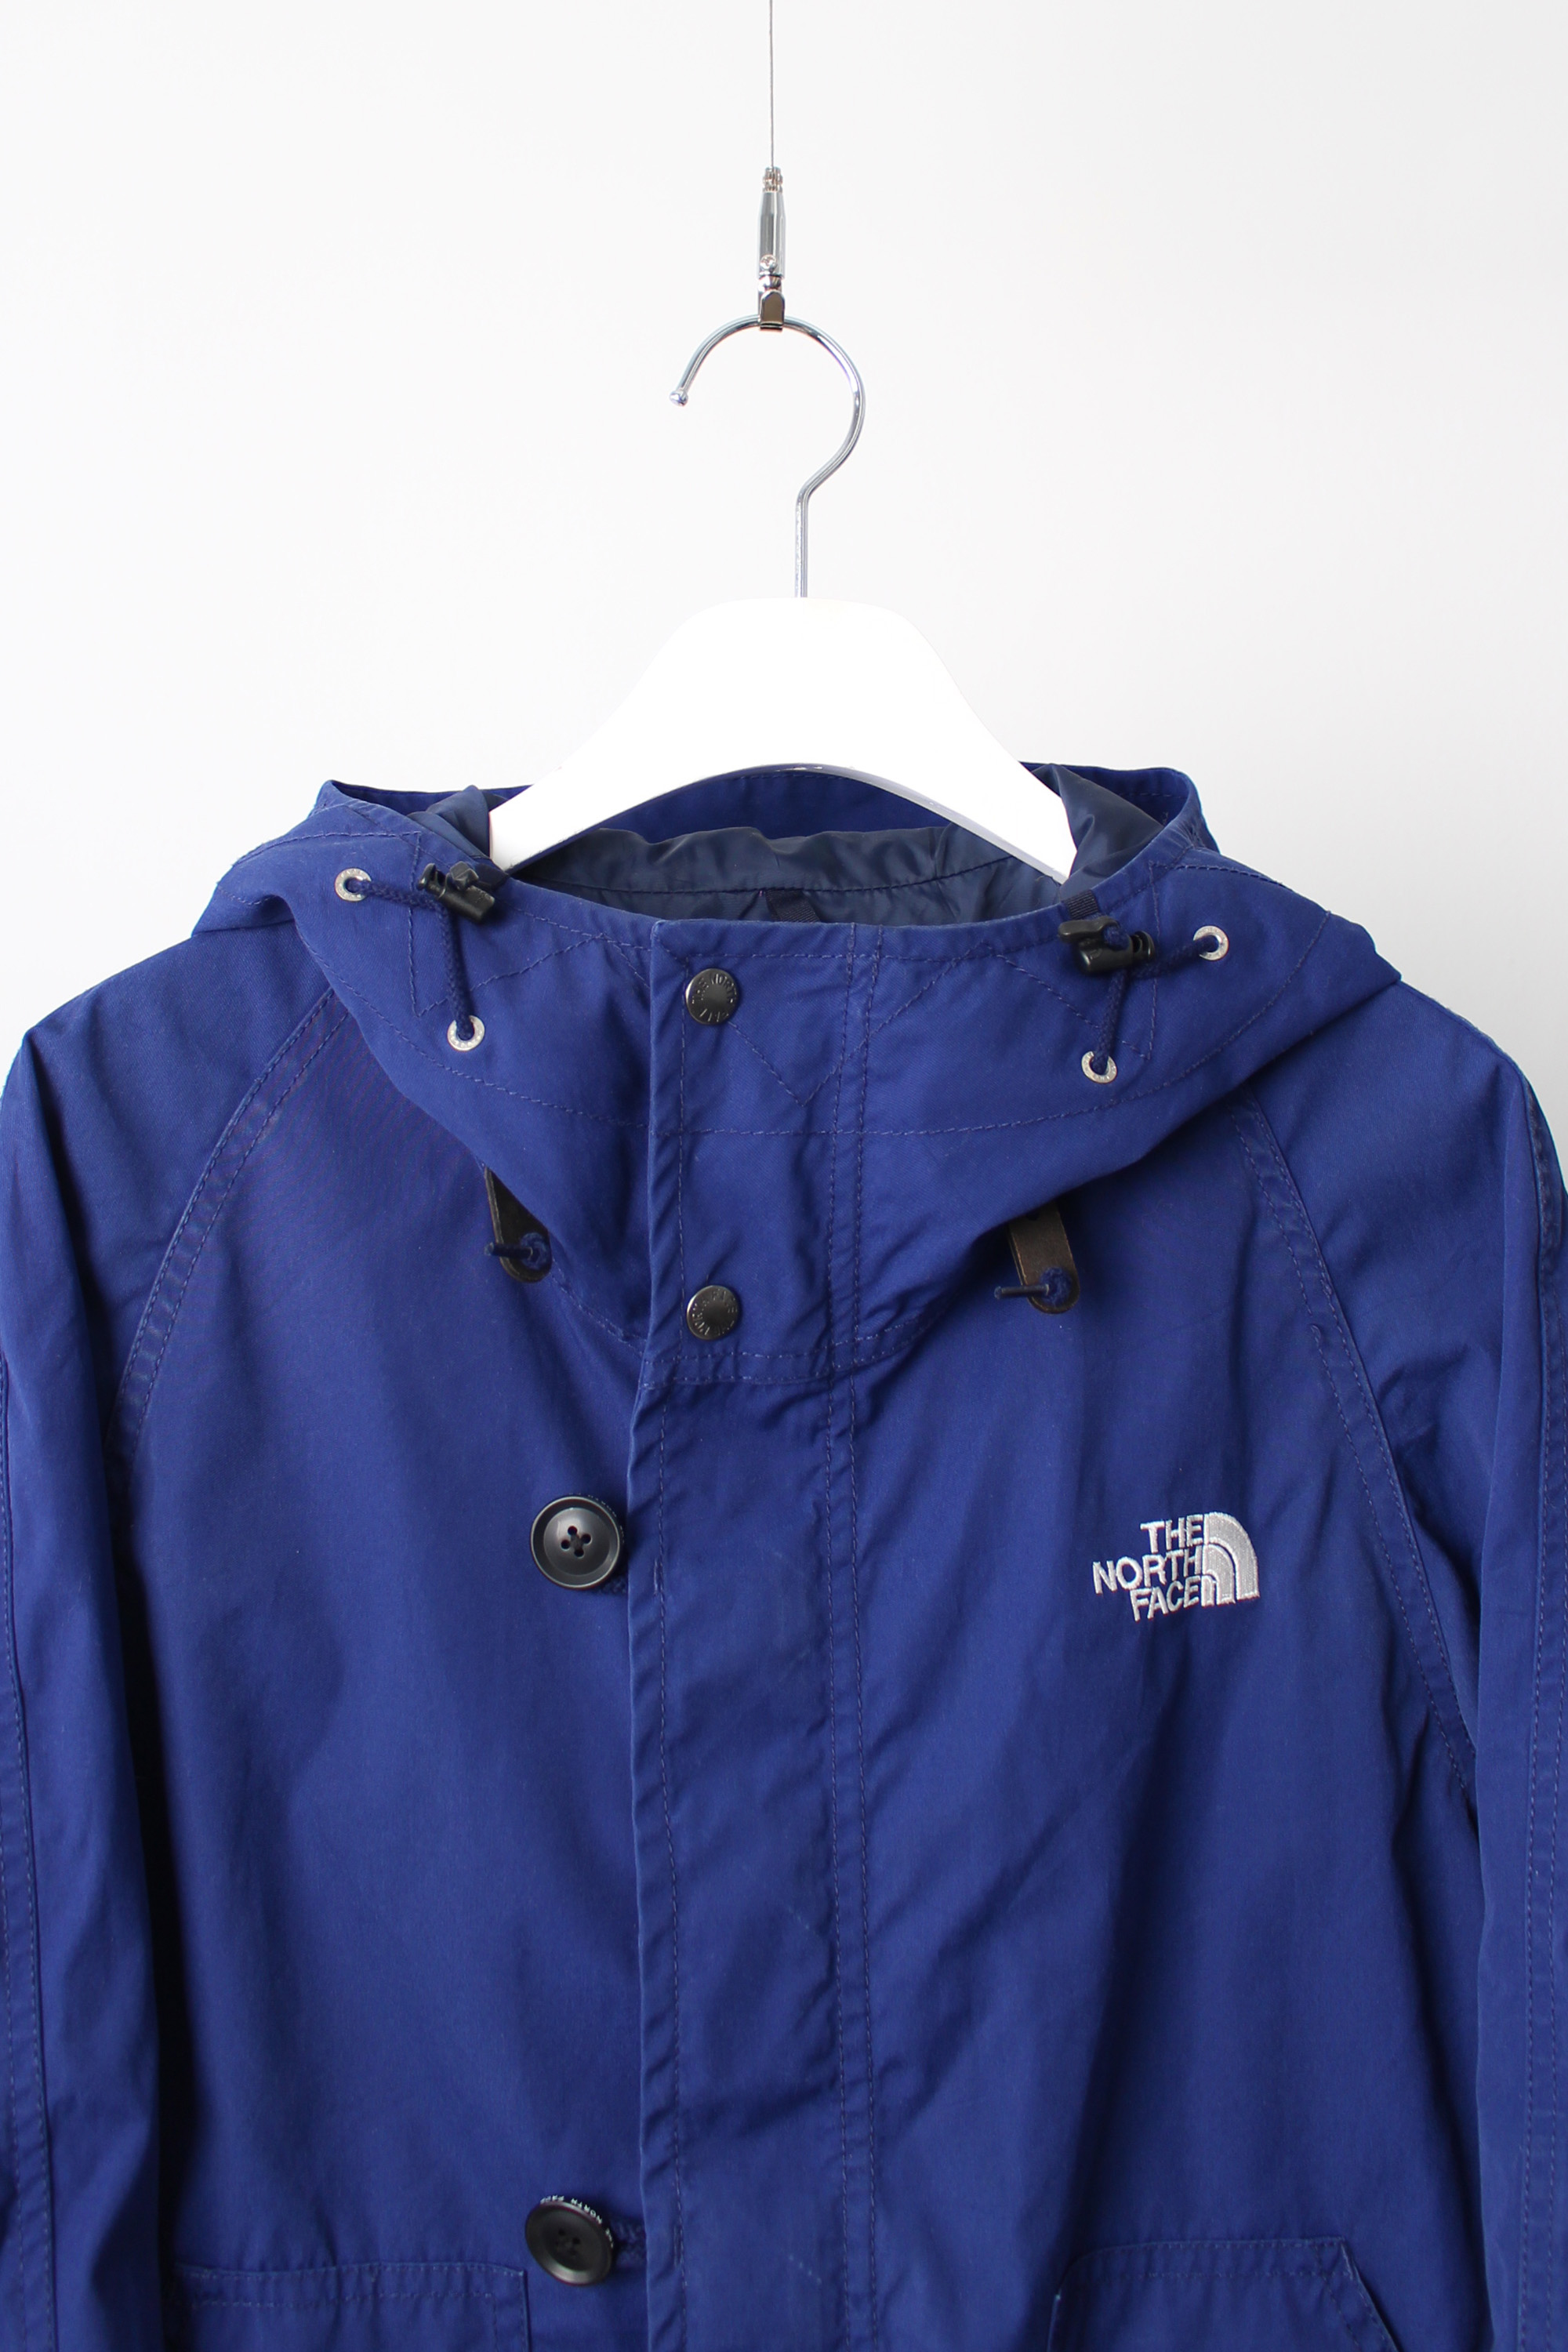 THE NORTH FACE PURPLE LABEL Mountain Jacket